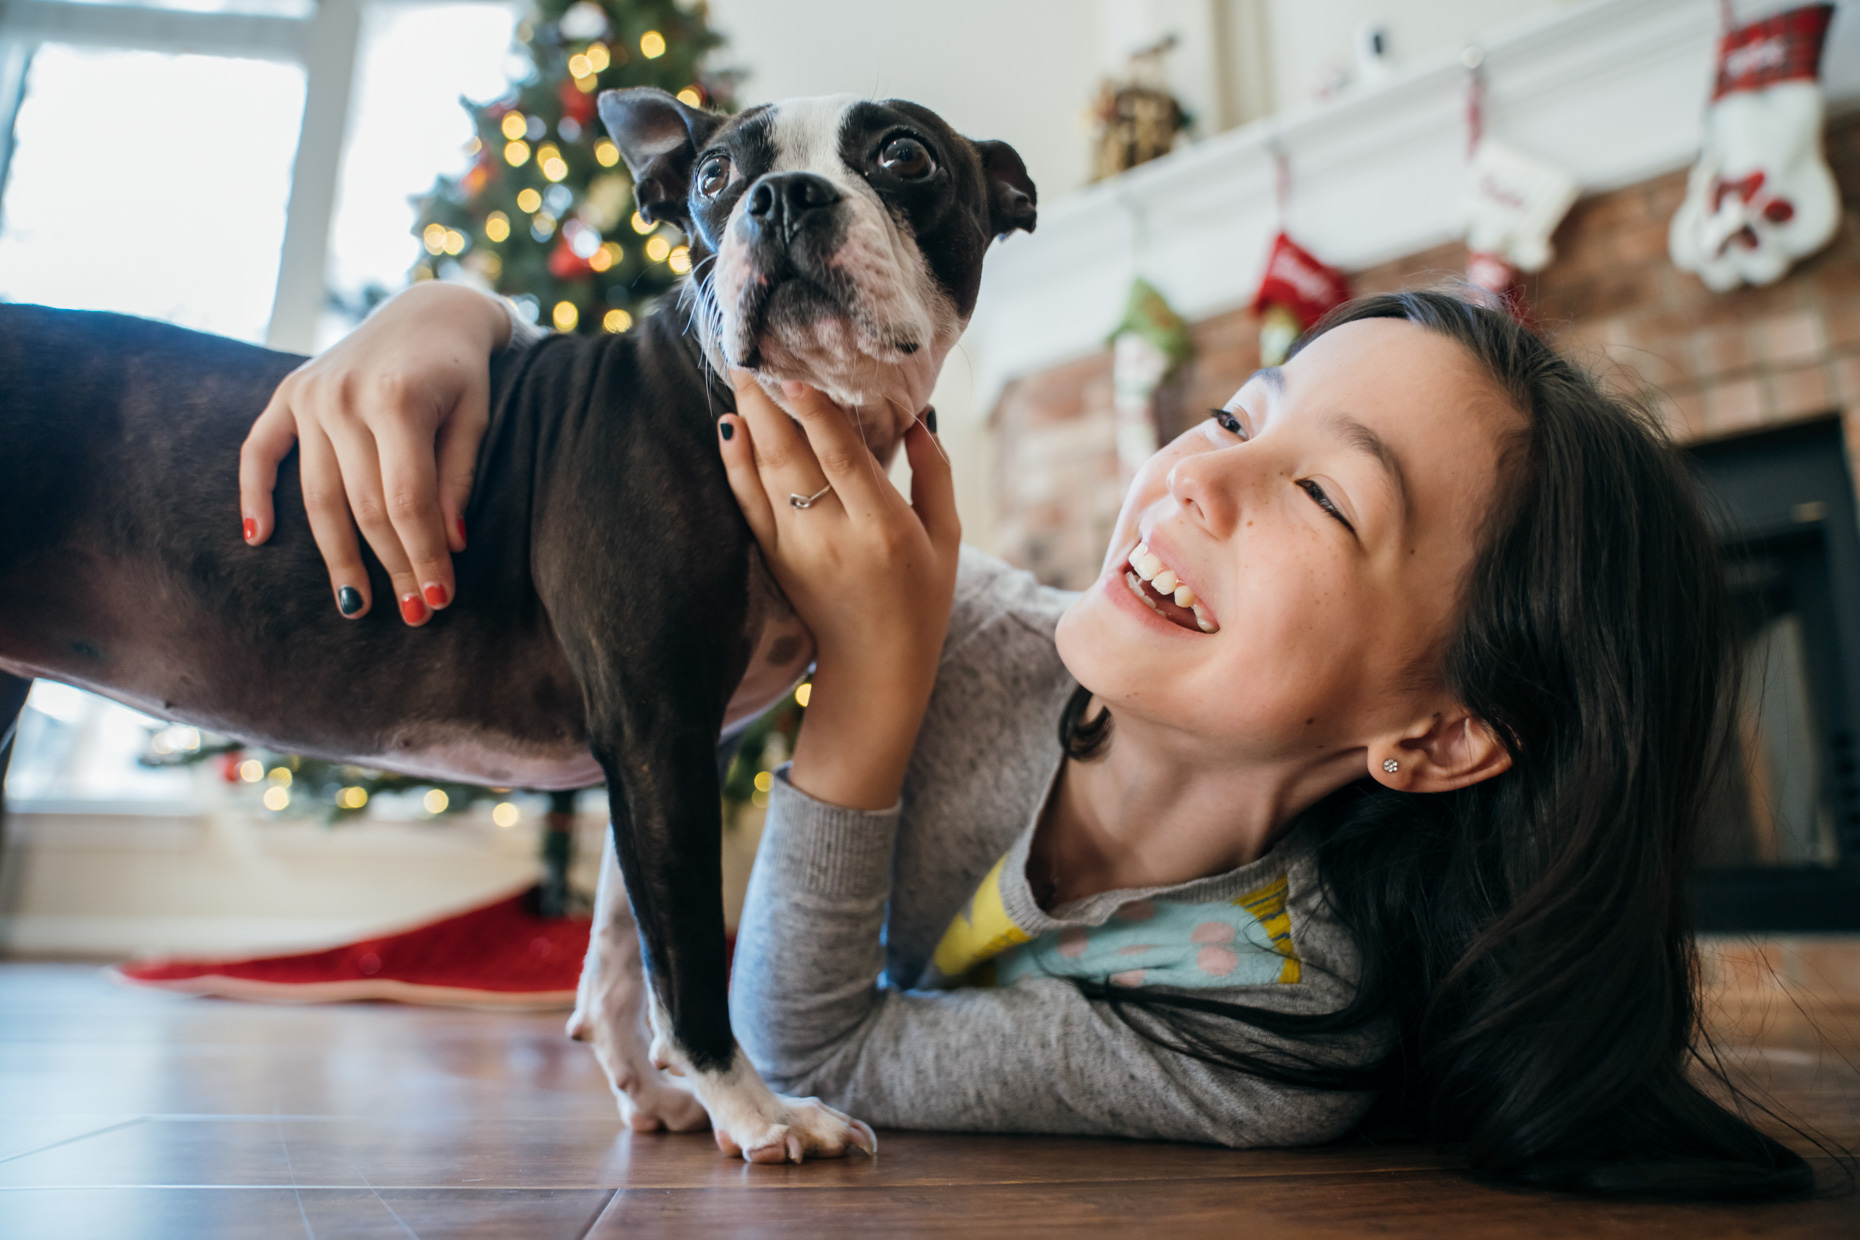 Little-girl-smiling-looking-at-dog-on-floor-at-chirstmas-20201220_Degner_0781